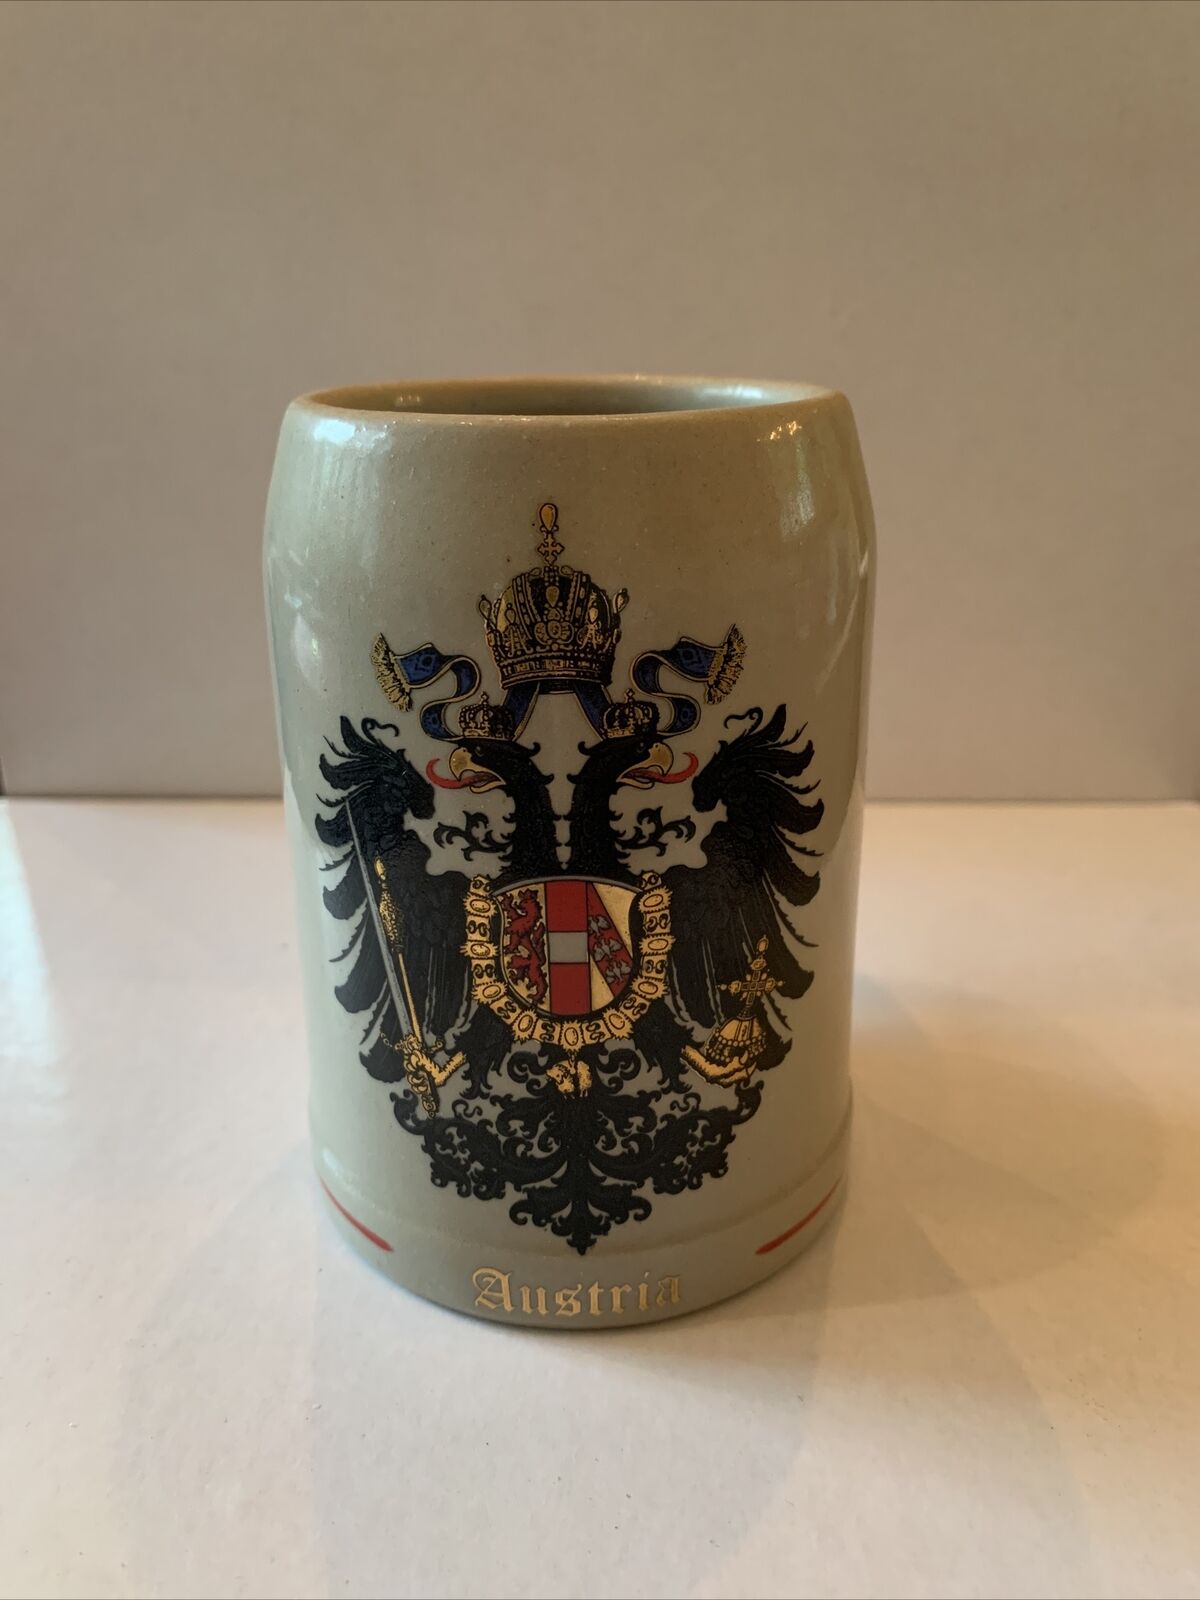 Austria Gold Rim Coat Of Arms Beer Stein Mug .25L In Excellent Condition